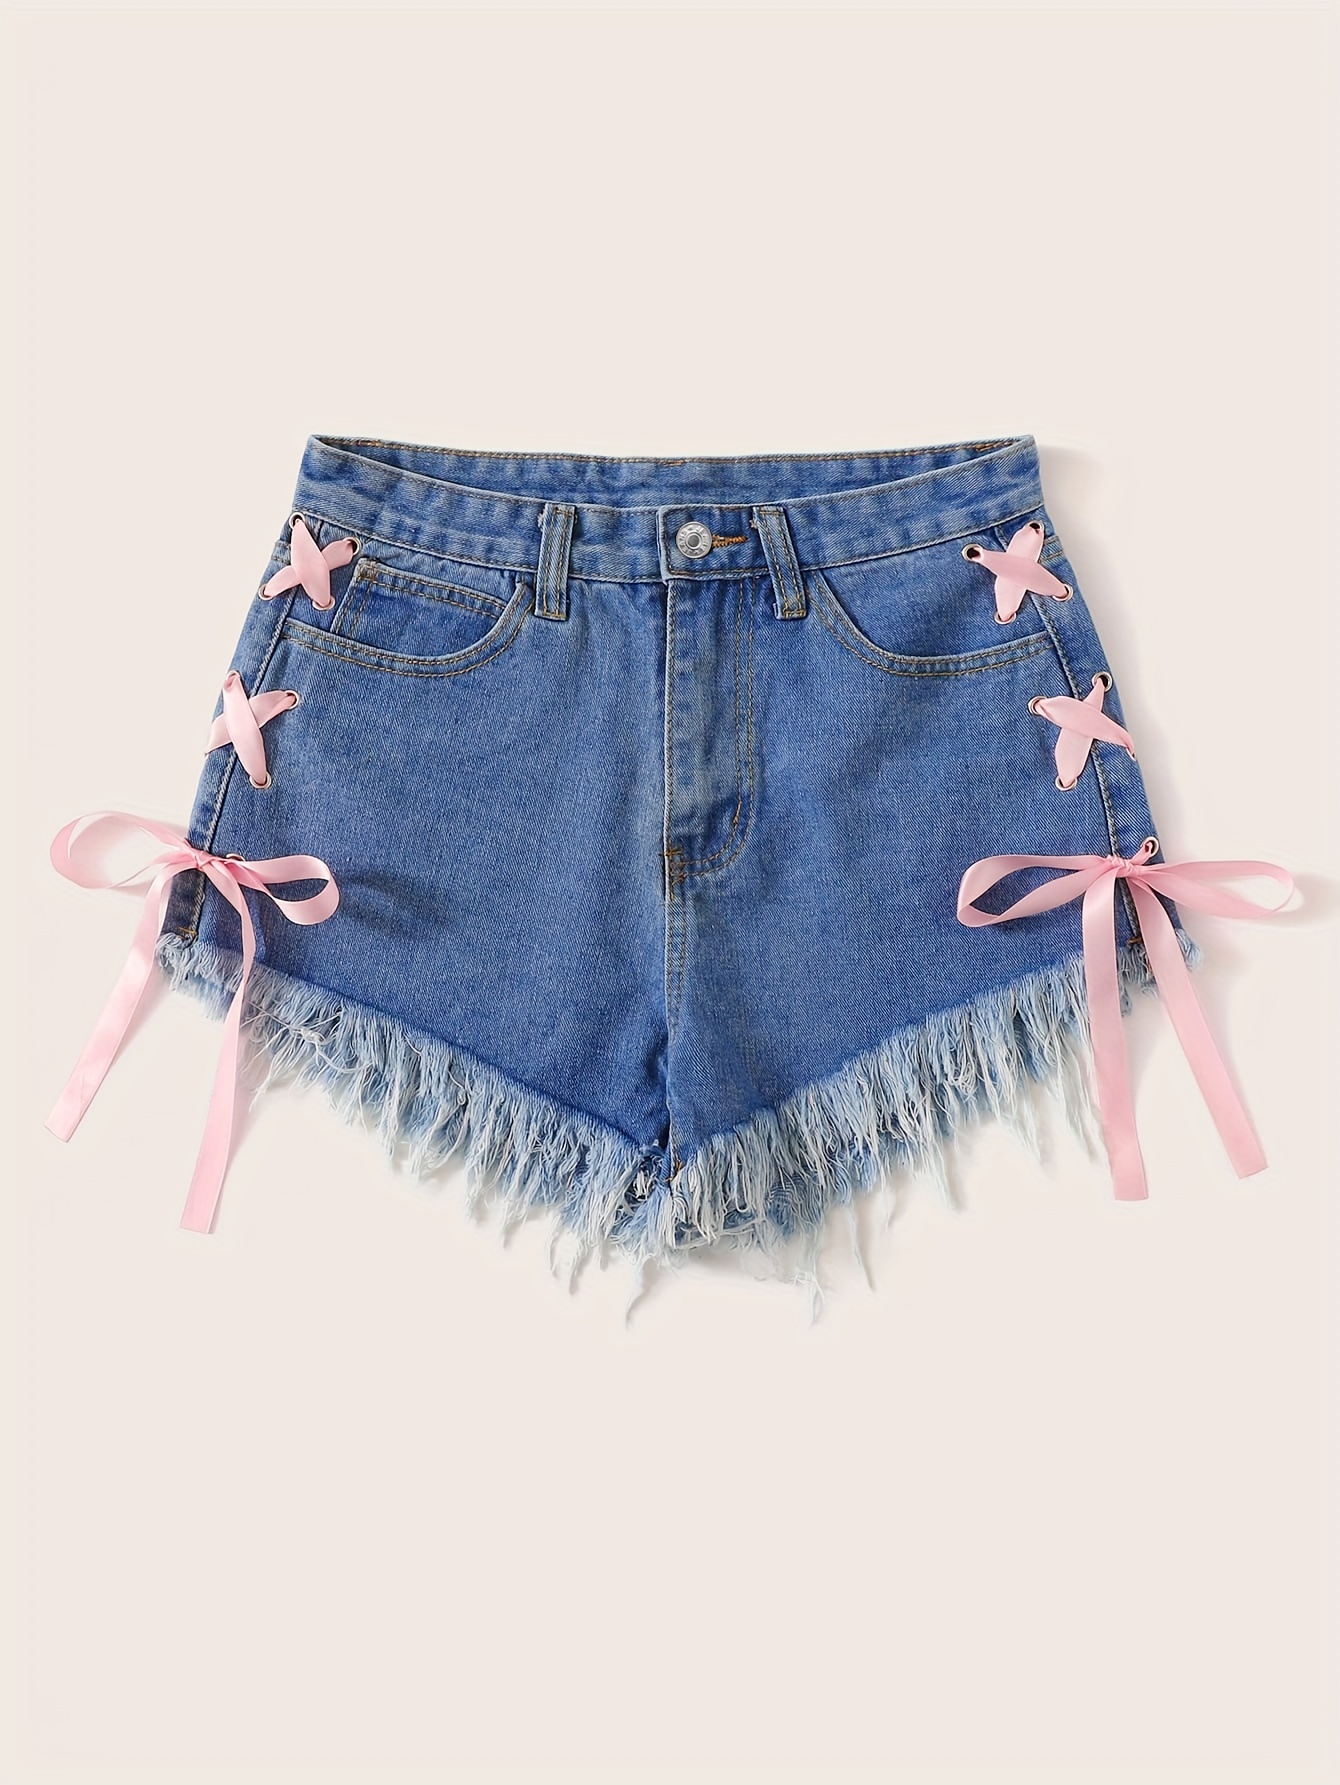 SHEIN SXY Plus Grommet Lace Up Shorts Without Panty